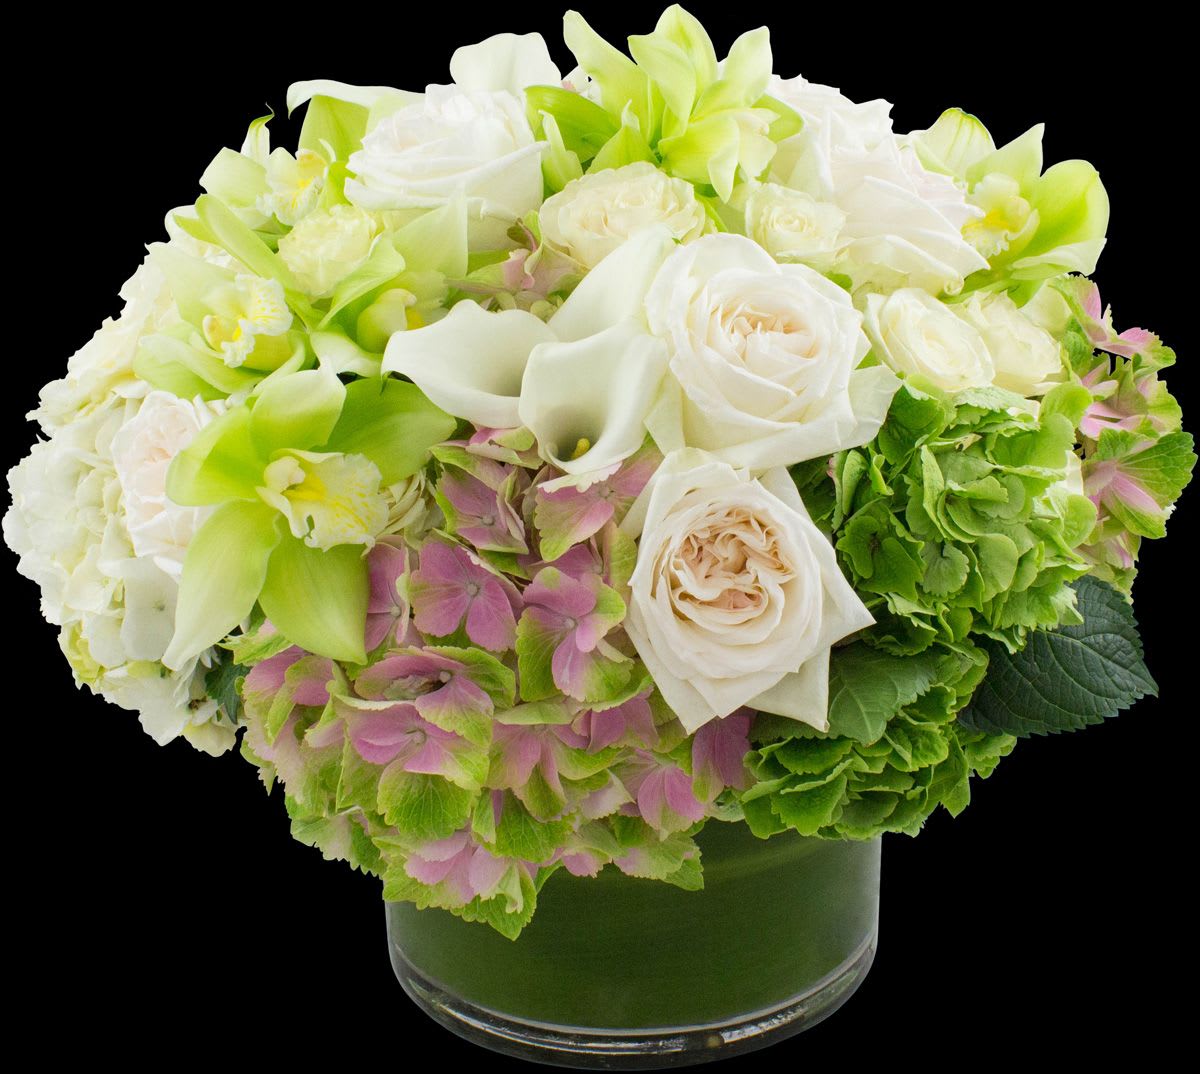 Blushing Beauty Bouquet - This bouquet is elegantly designed with a modern look and feel. With upscale blooms of garden roses, hydrangea, orchids and callas.